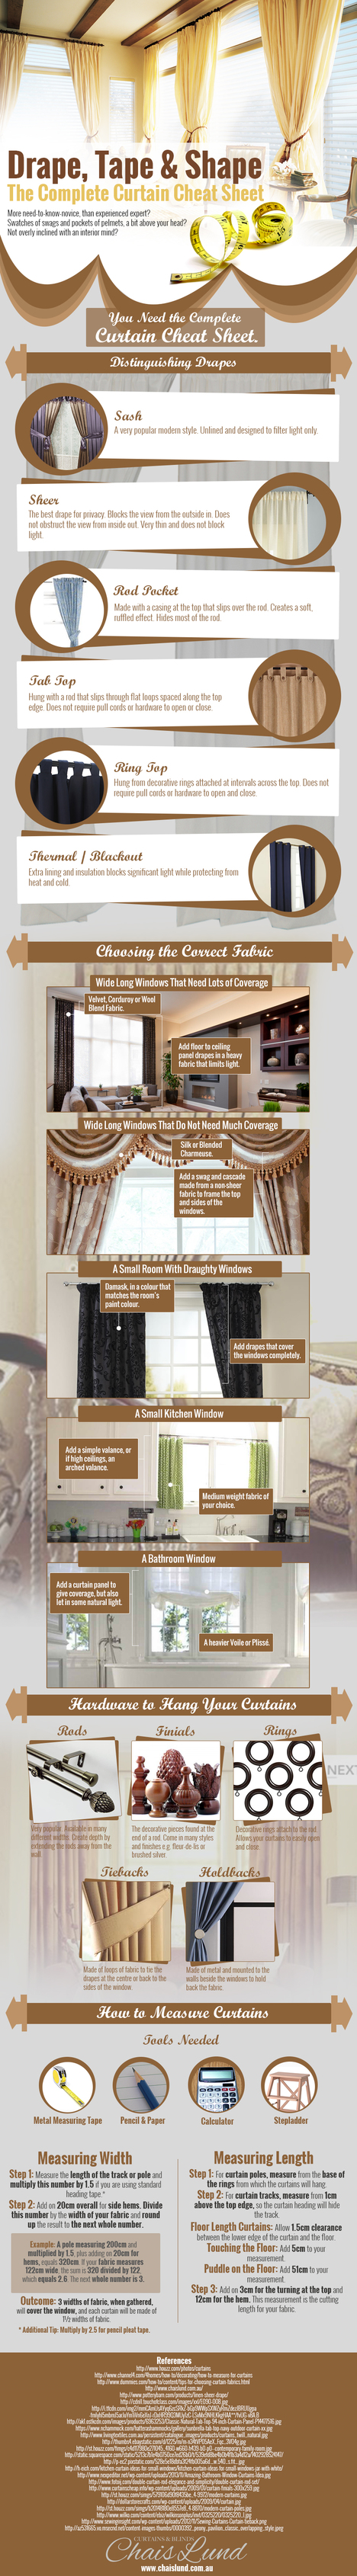 The Complete Curtain Cheat Sheet